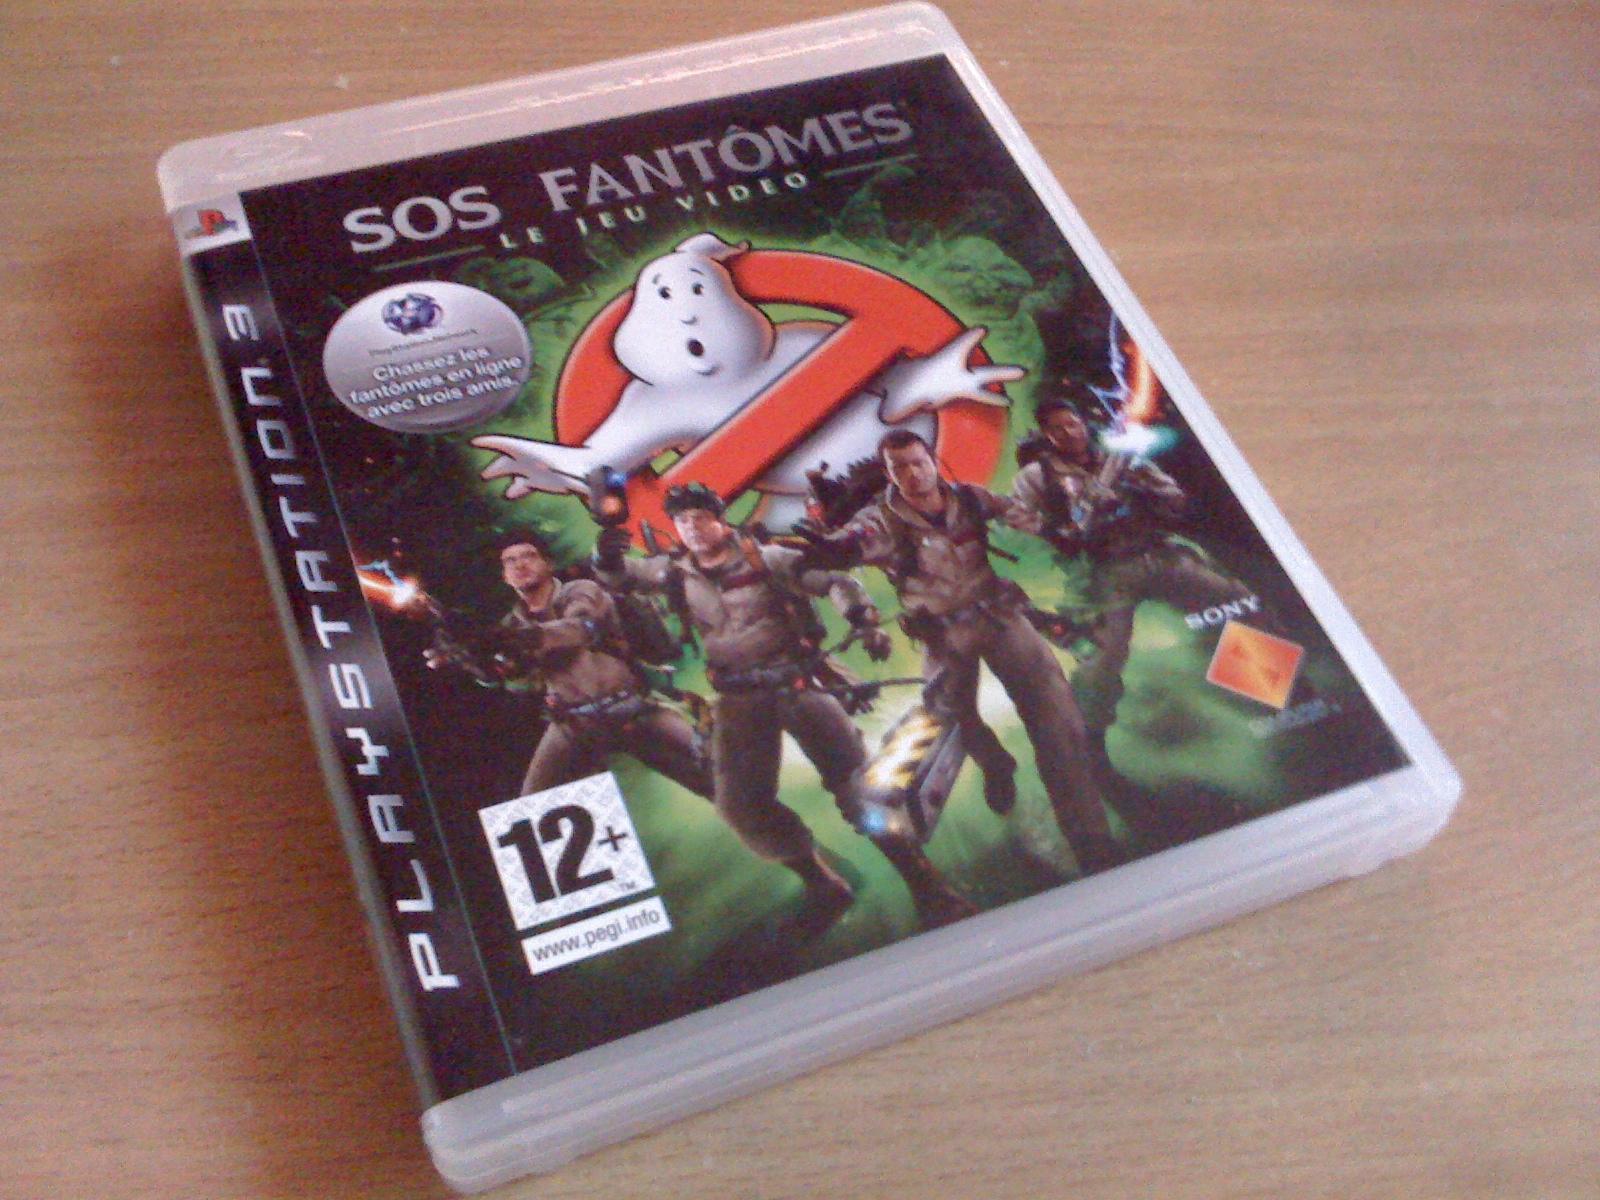 [ARRIVAGE] S.O.S Fantômes – Ghostbusters